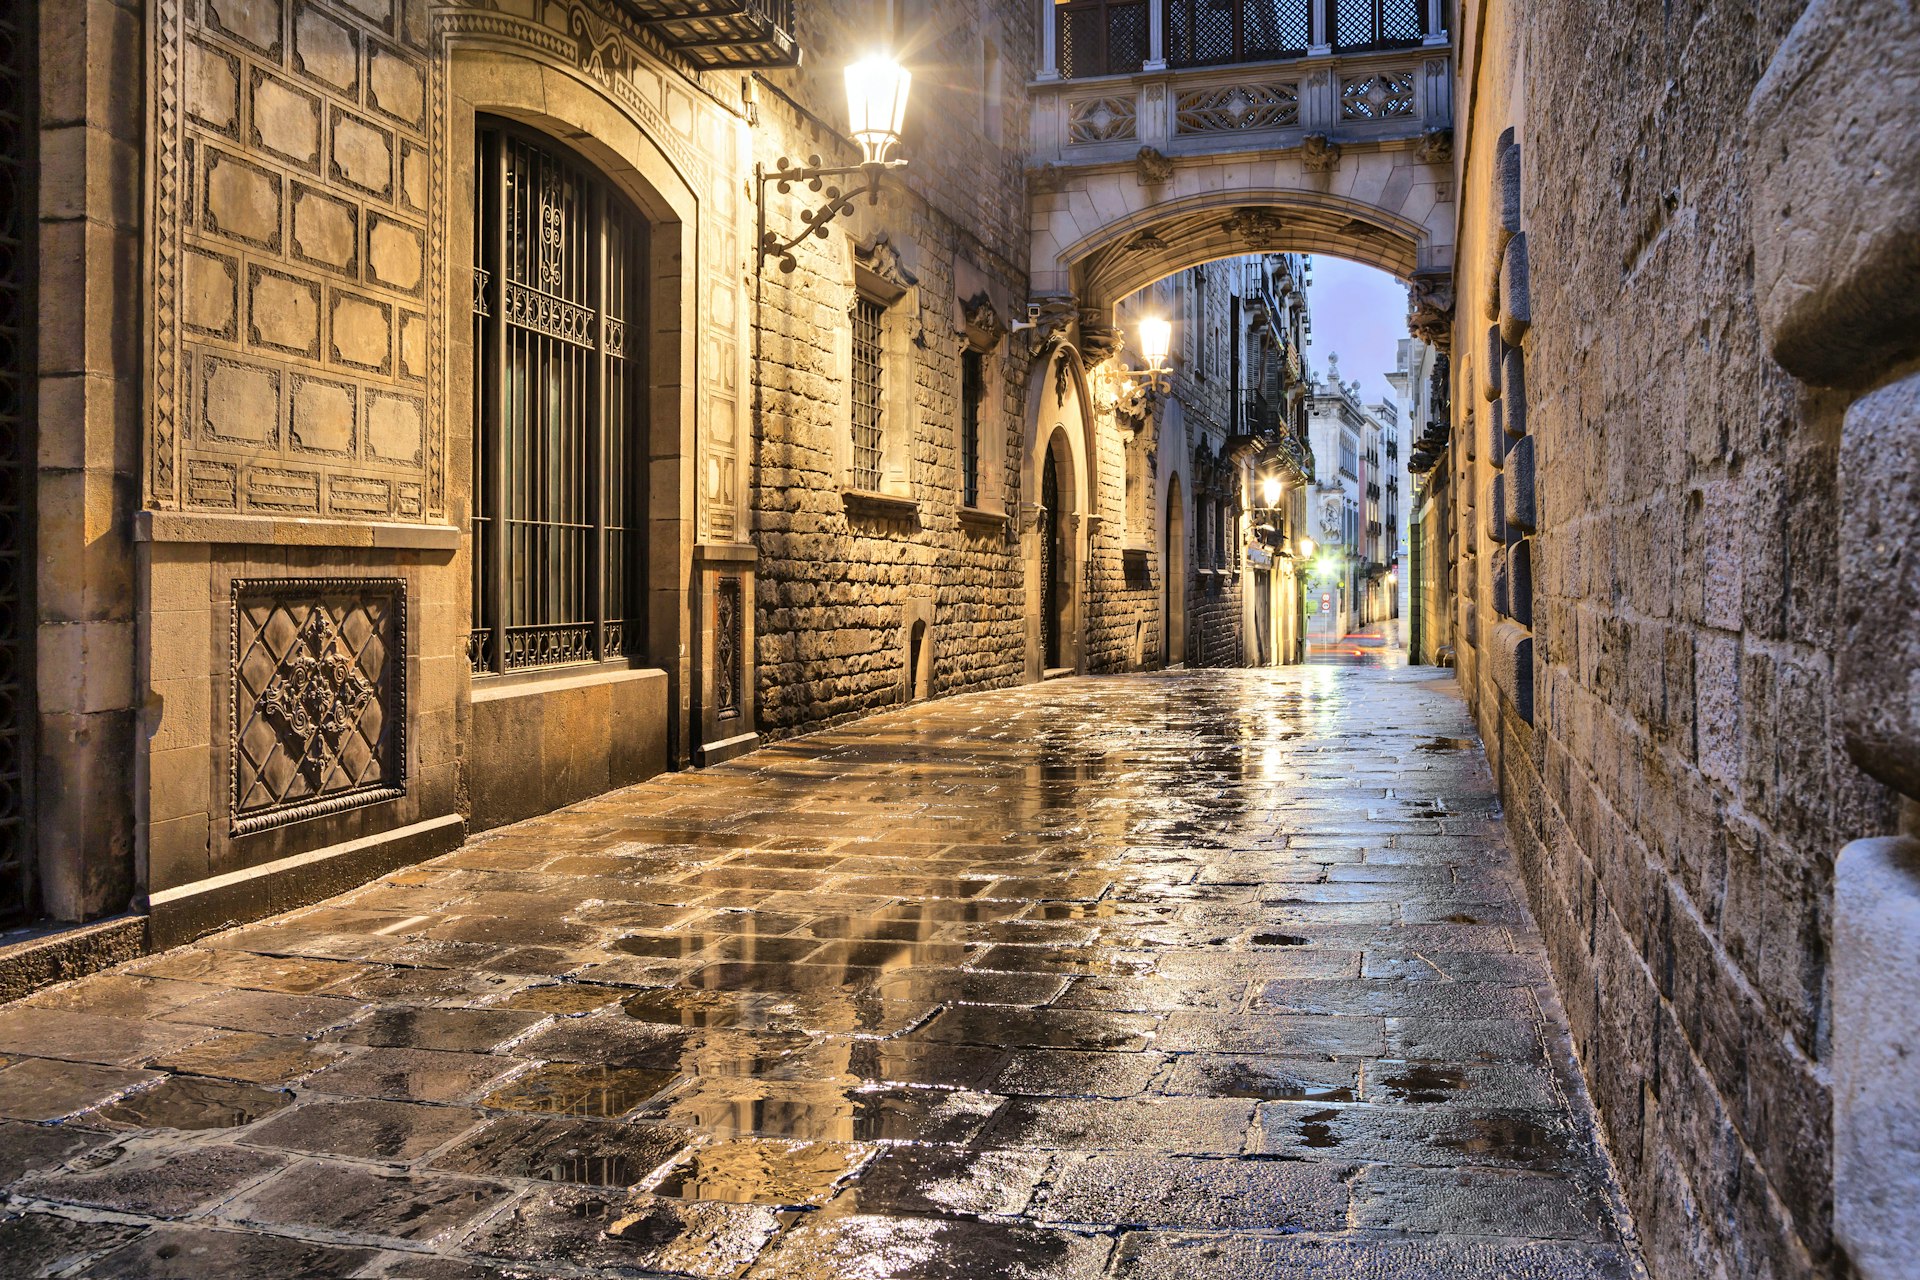 Narrow empty stone street in the Gothic quarter, with a stone bridge passing overhead.  